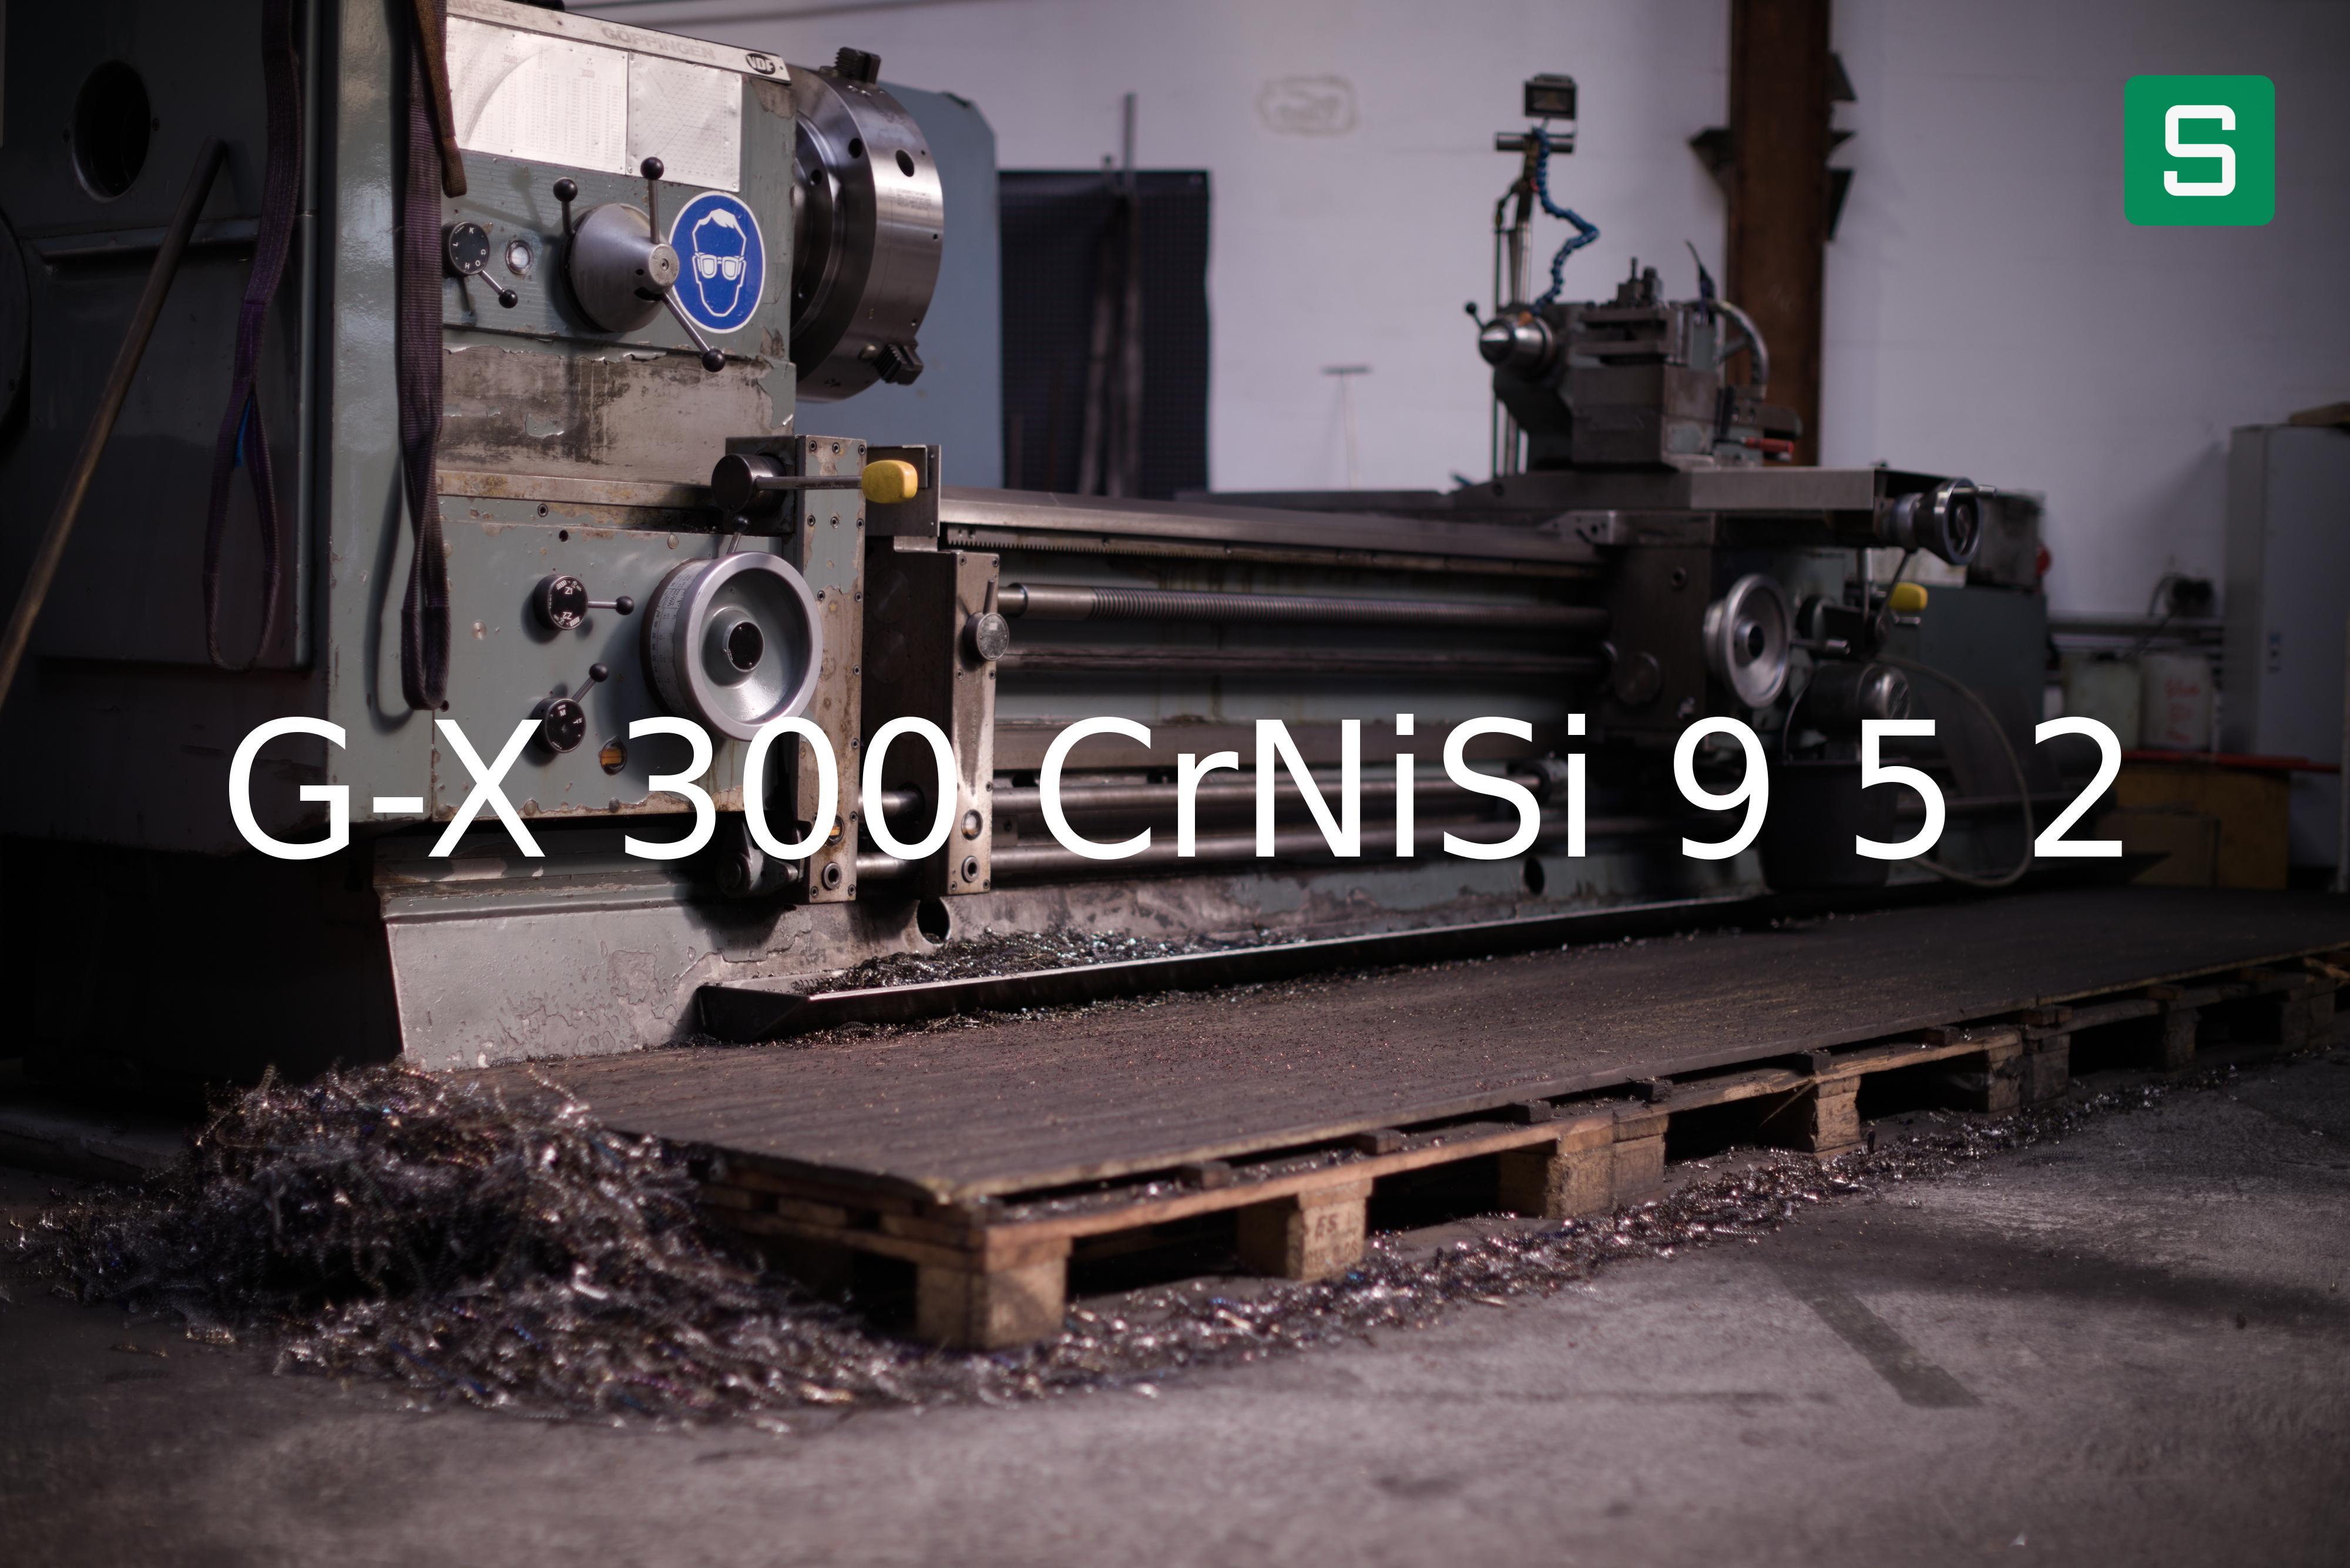 Steel Material: G-X 300 CrNiSi 9 5 2